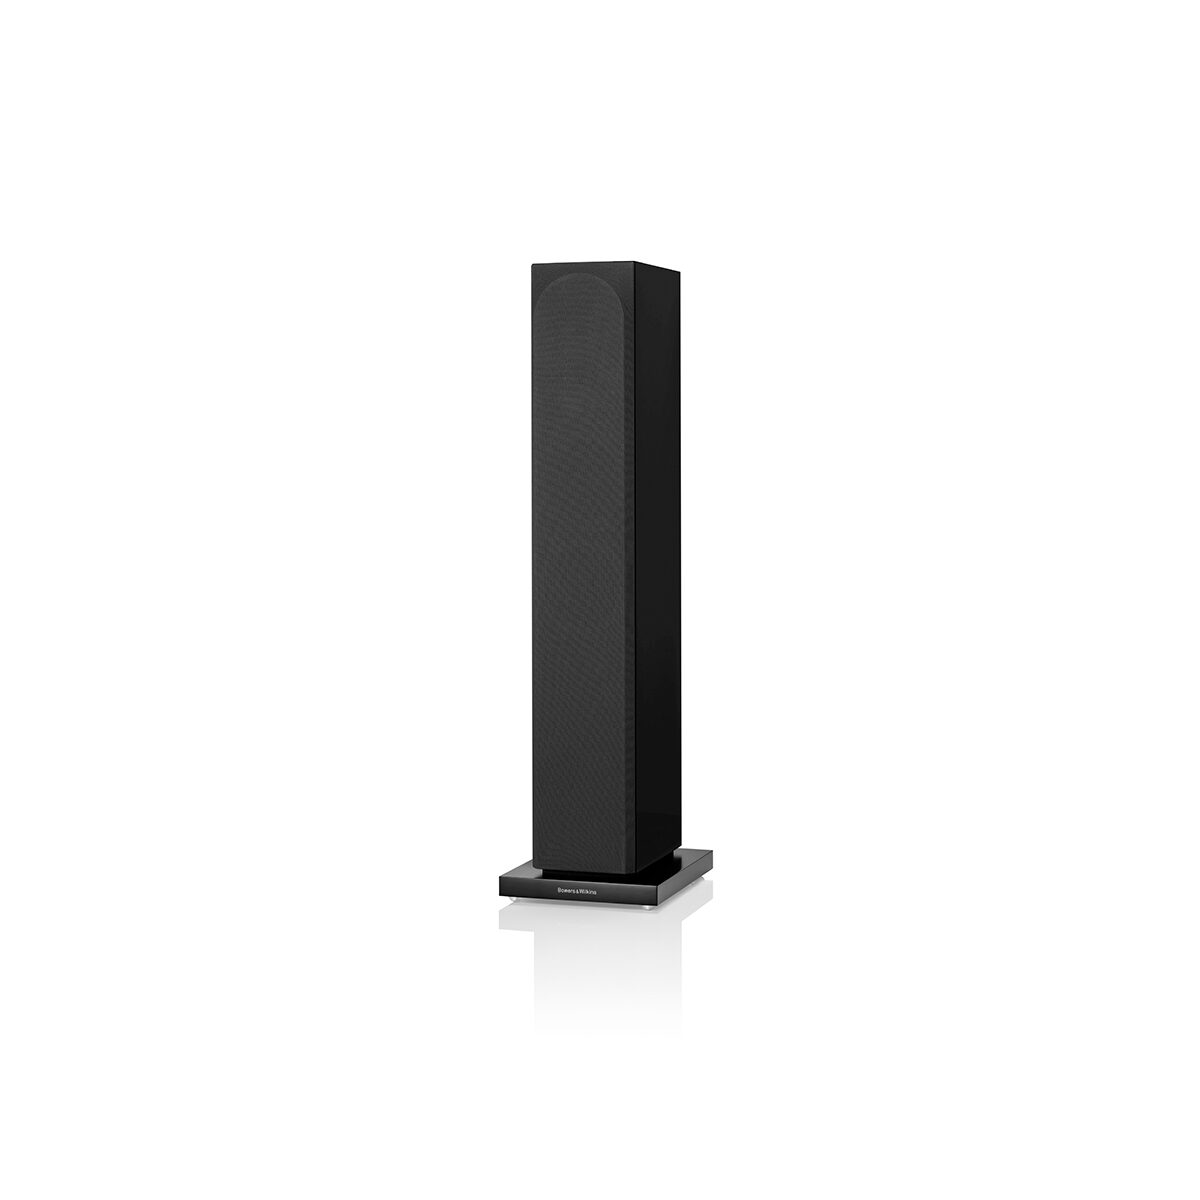 Bowers&Wilkins-704S3-Black-Cover